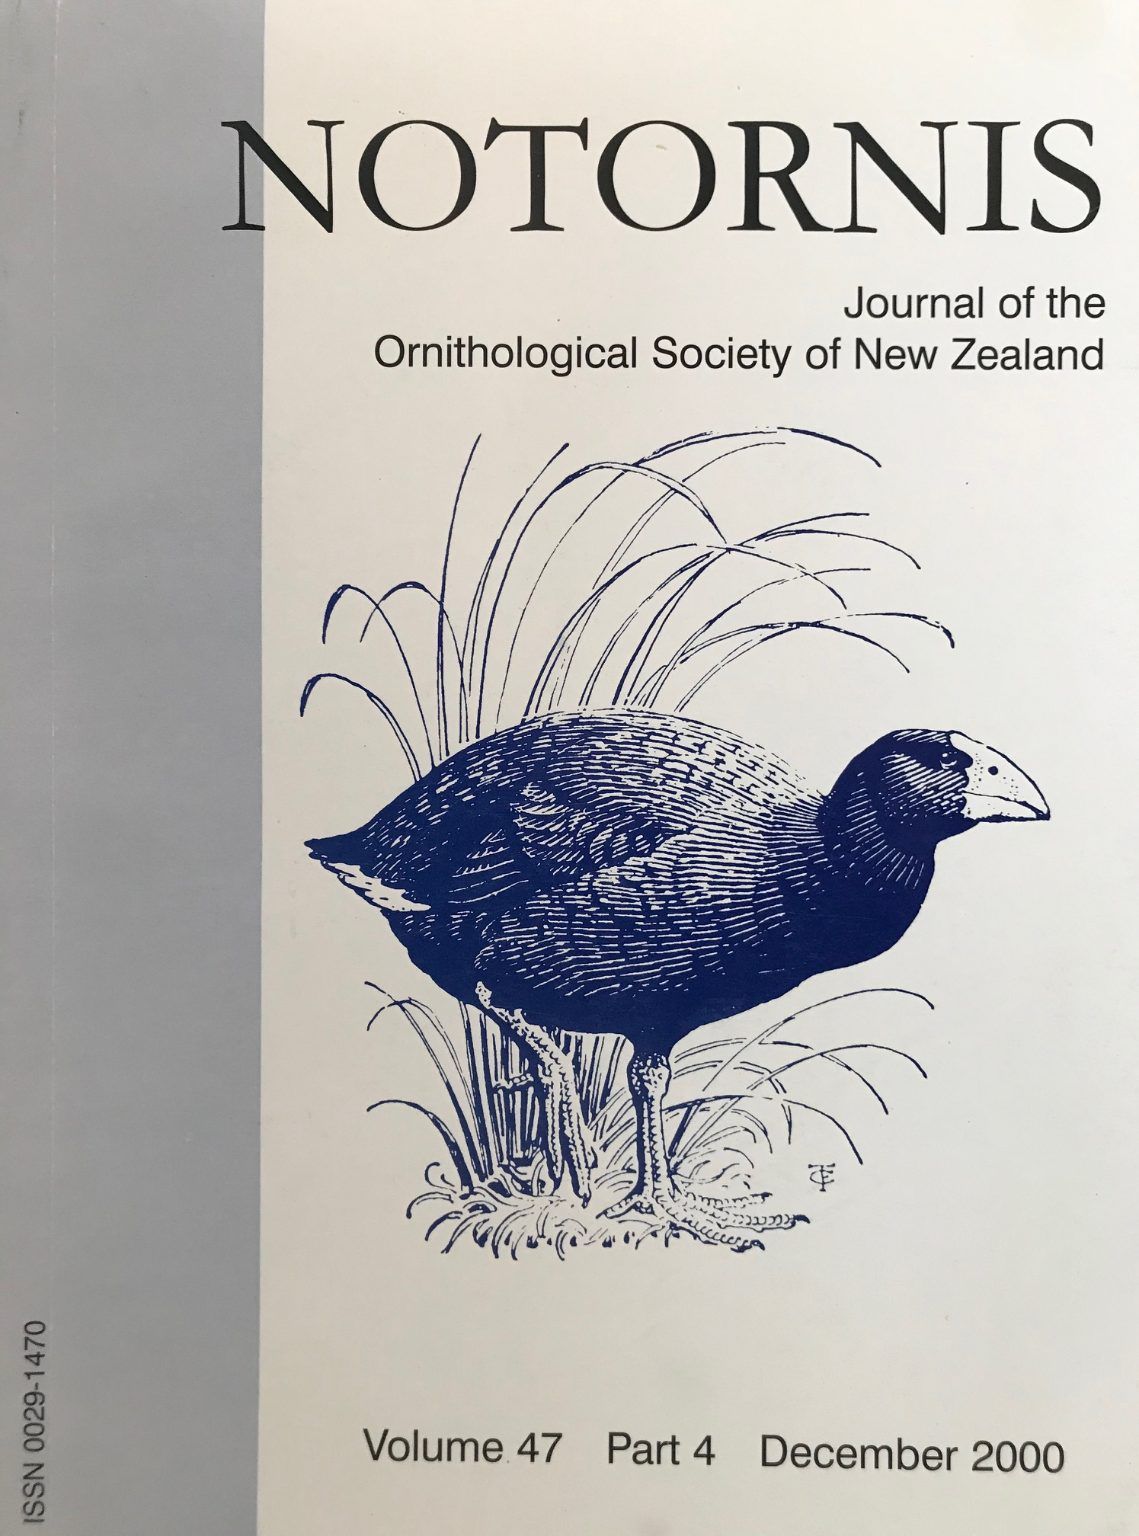 NOTORNIS: Journal of the Ornithological Society of NZ - Volume 47, Part 4